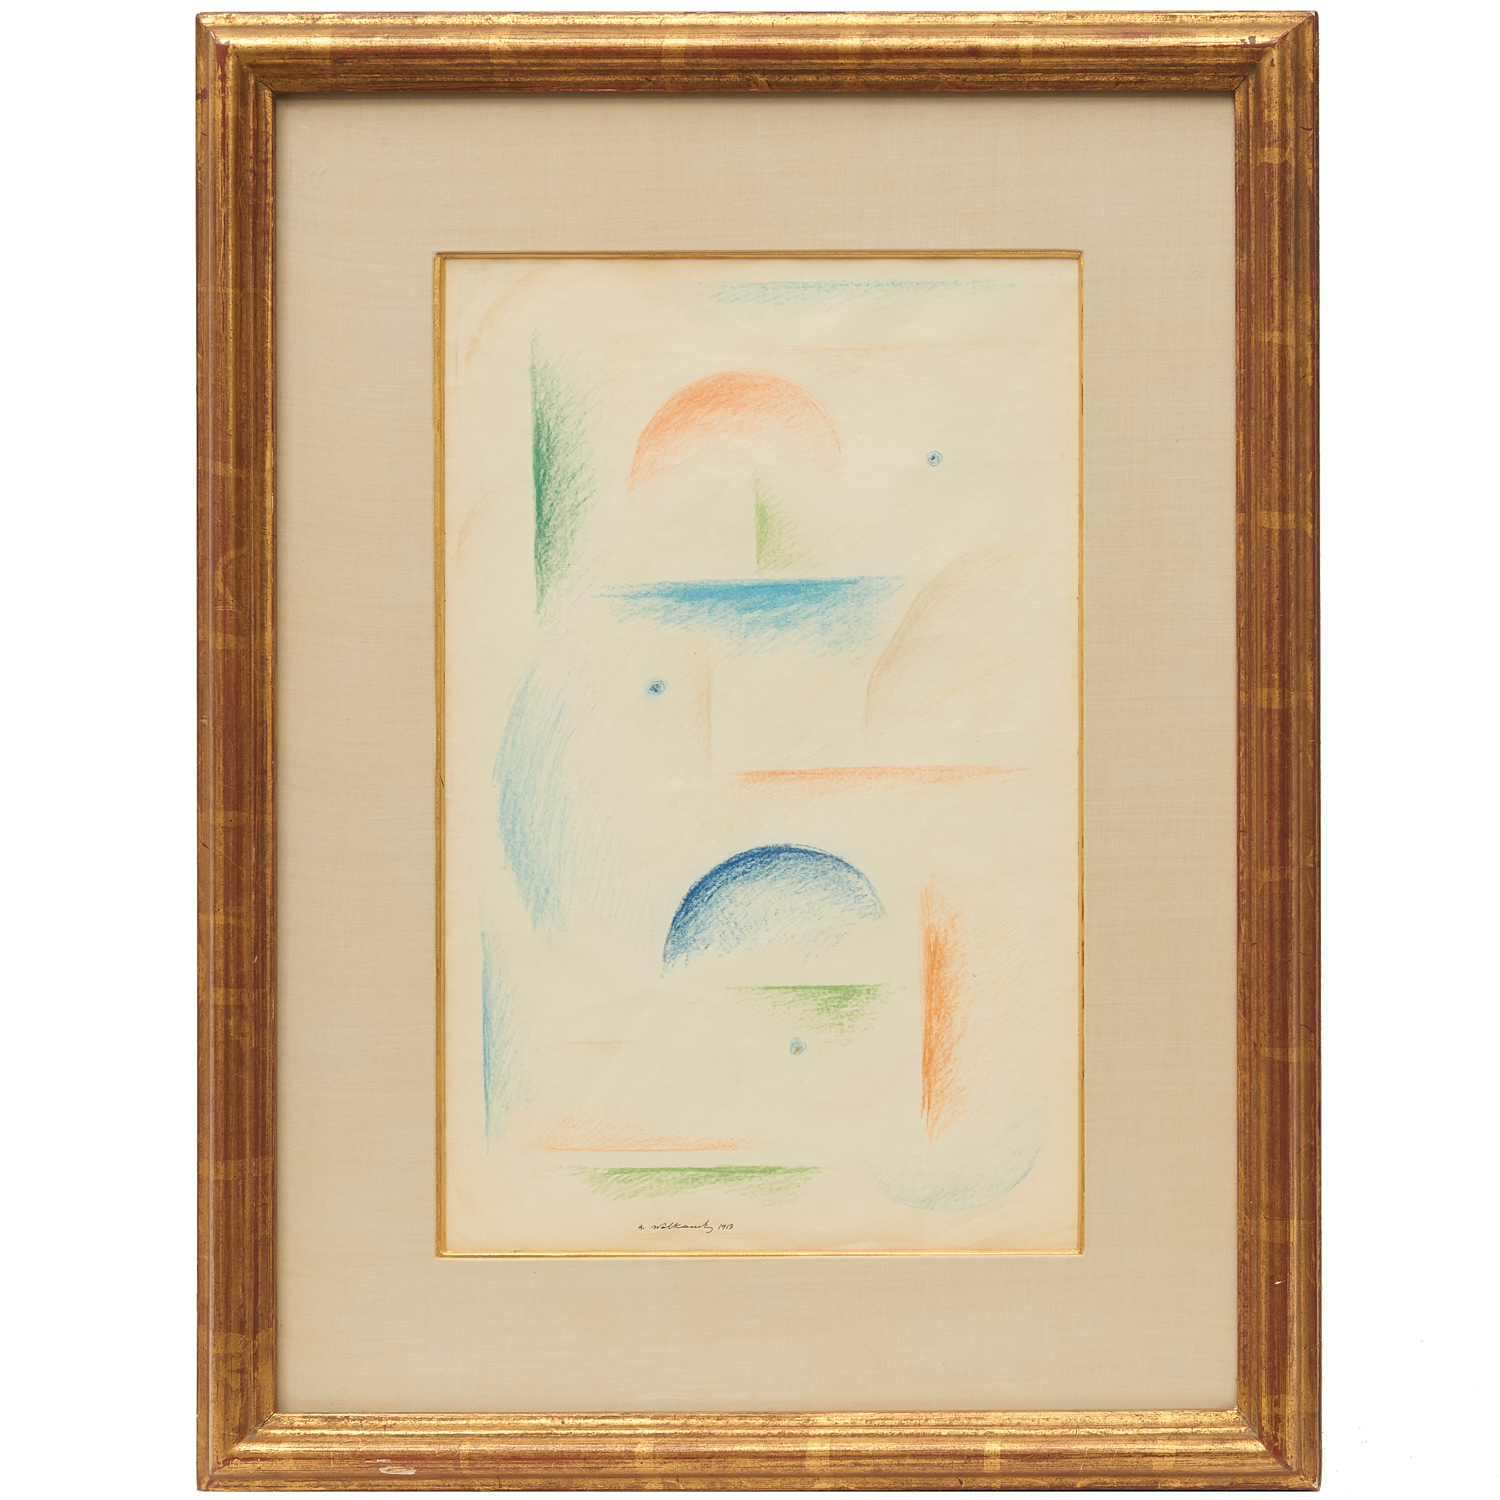 ABRAHAM WALKOWITZ, COLORED CRAYON ON